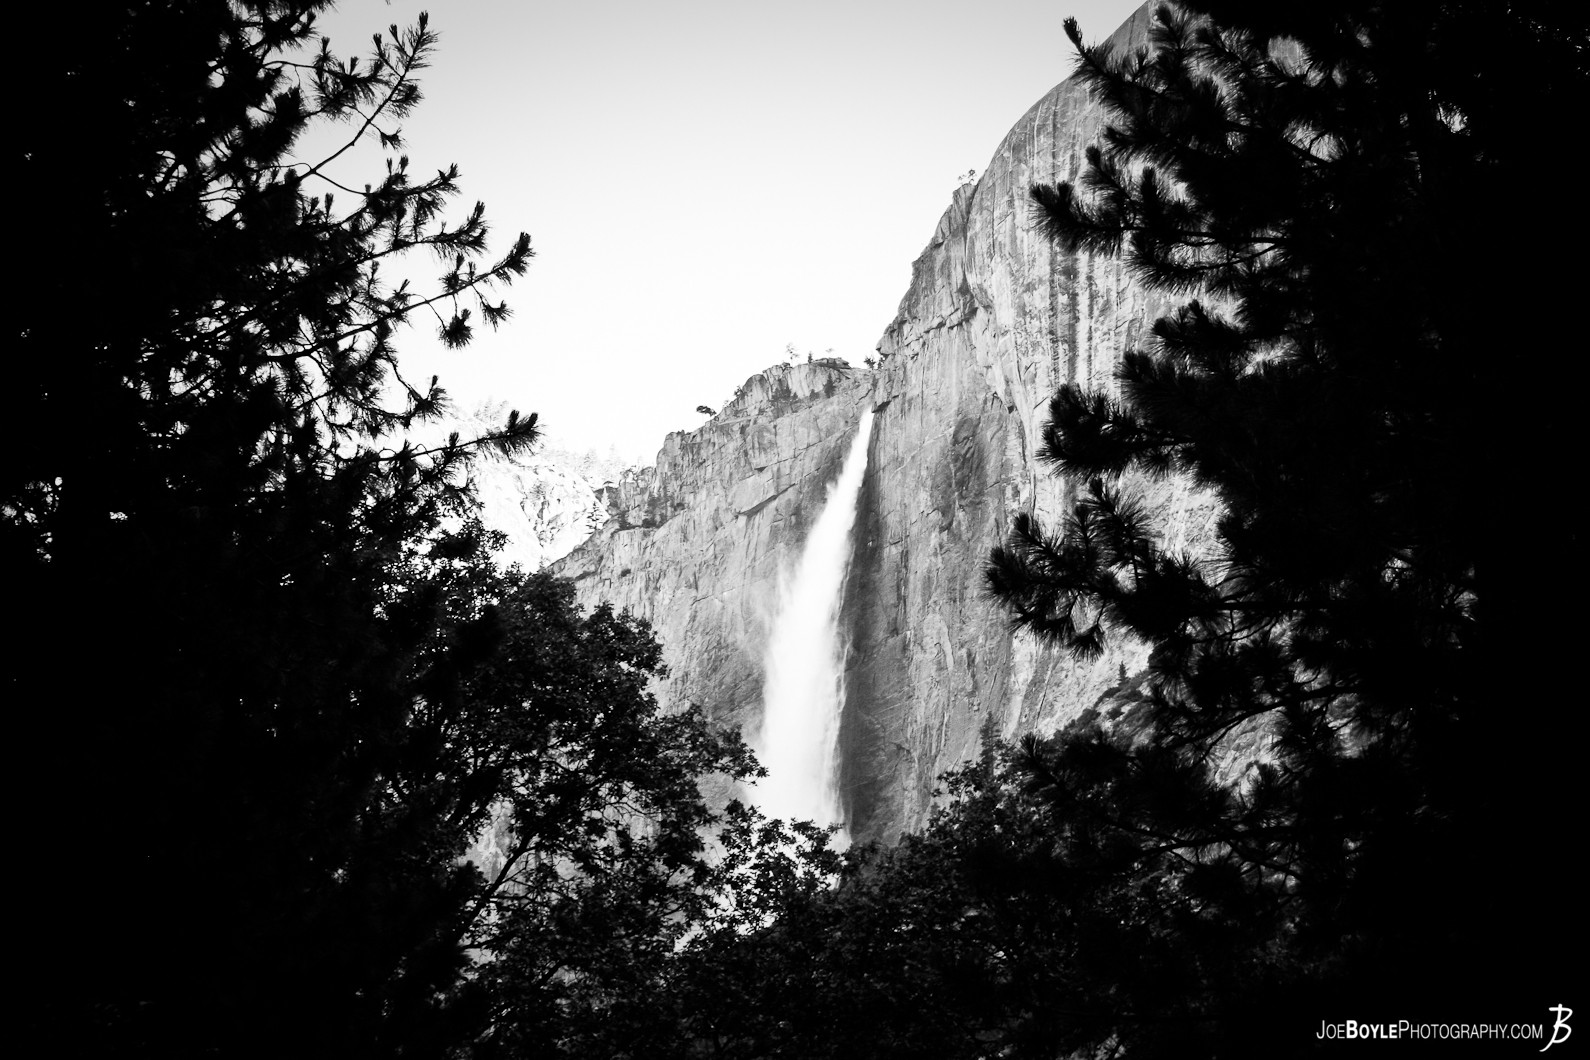  The most famous waterfall in Yosemite National Park. This image was captured near the start of the John Muir Trail at the Happy Isle Nature Center in Yosemite Valley. 